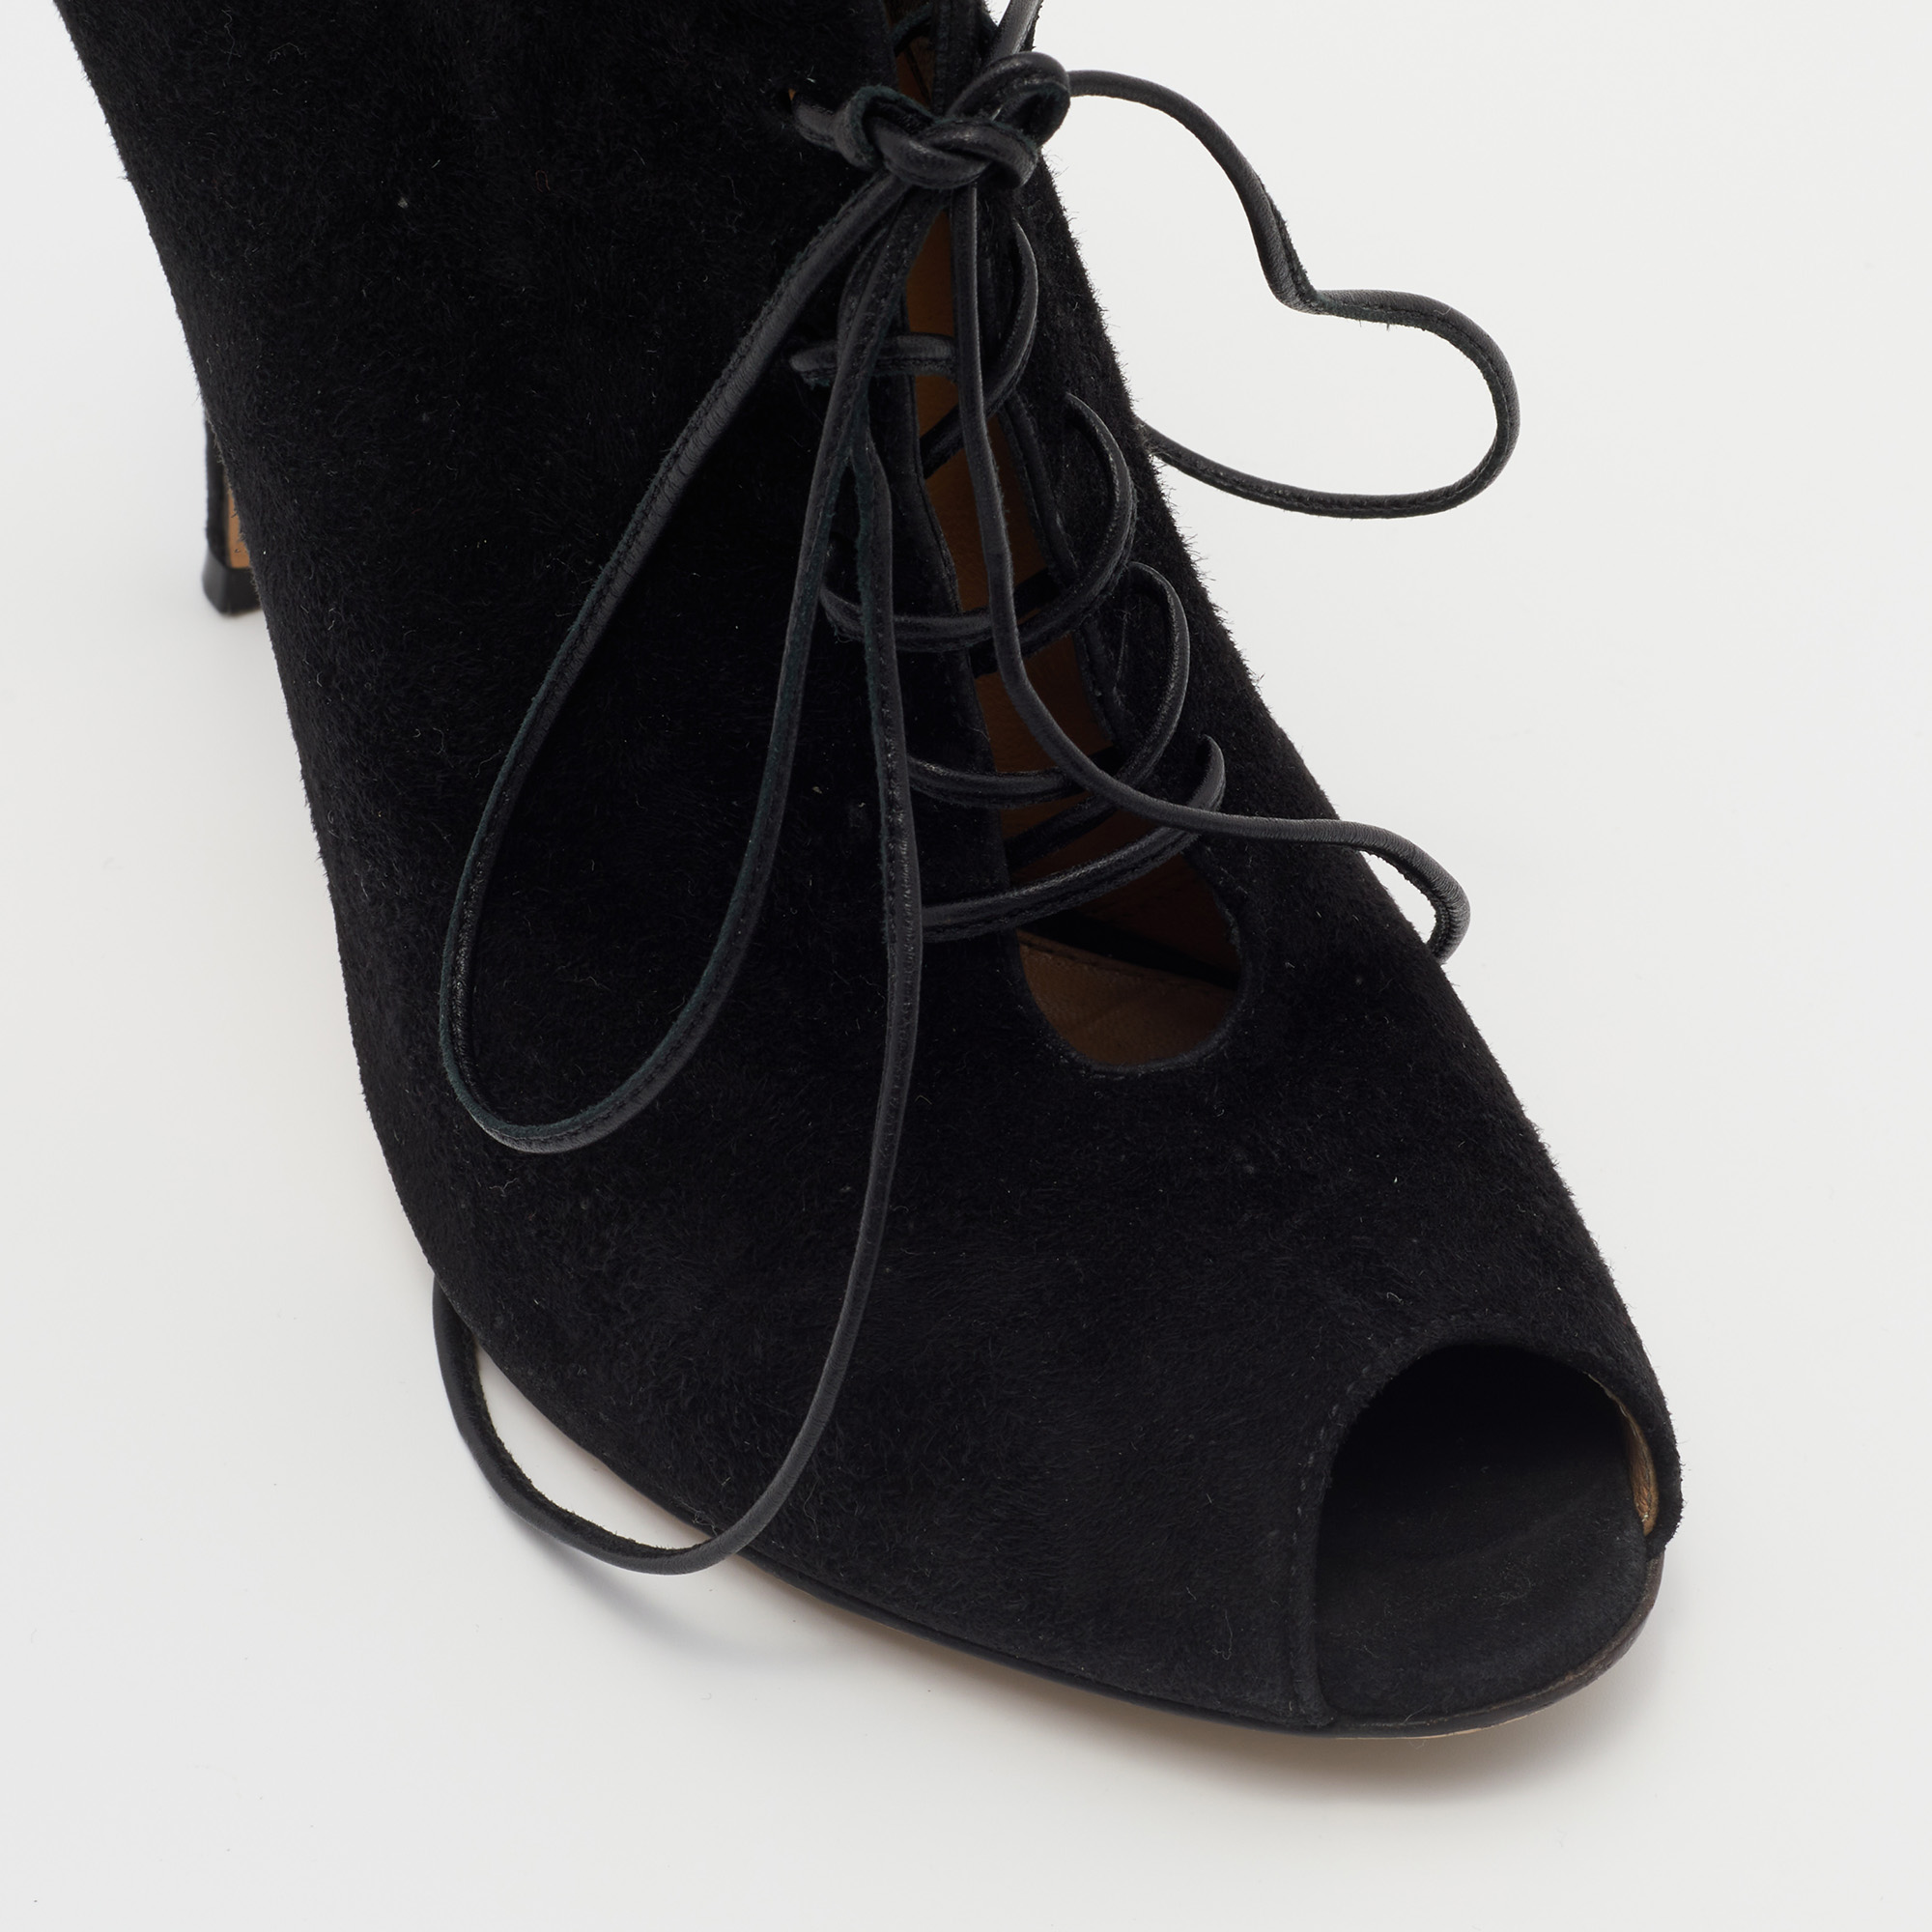 Gianvito Rossi Black Suede Jane Ankle Booties Size 38